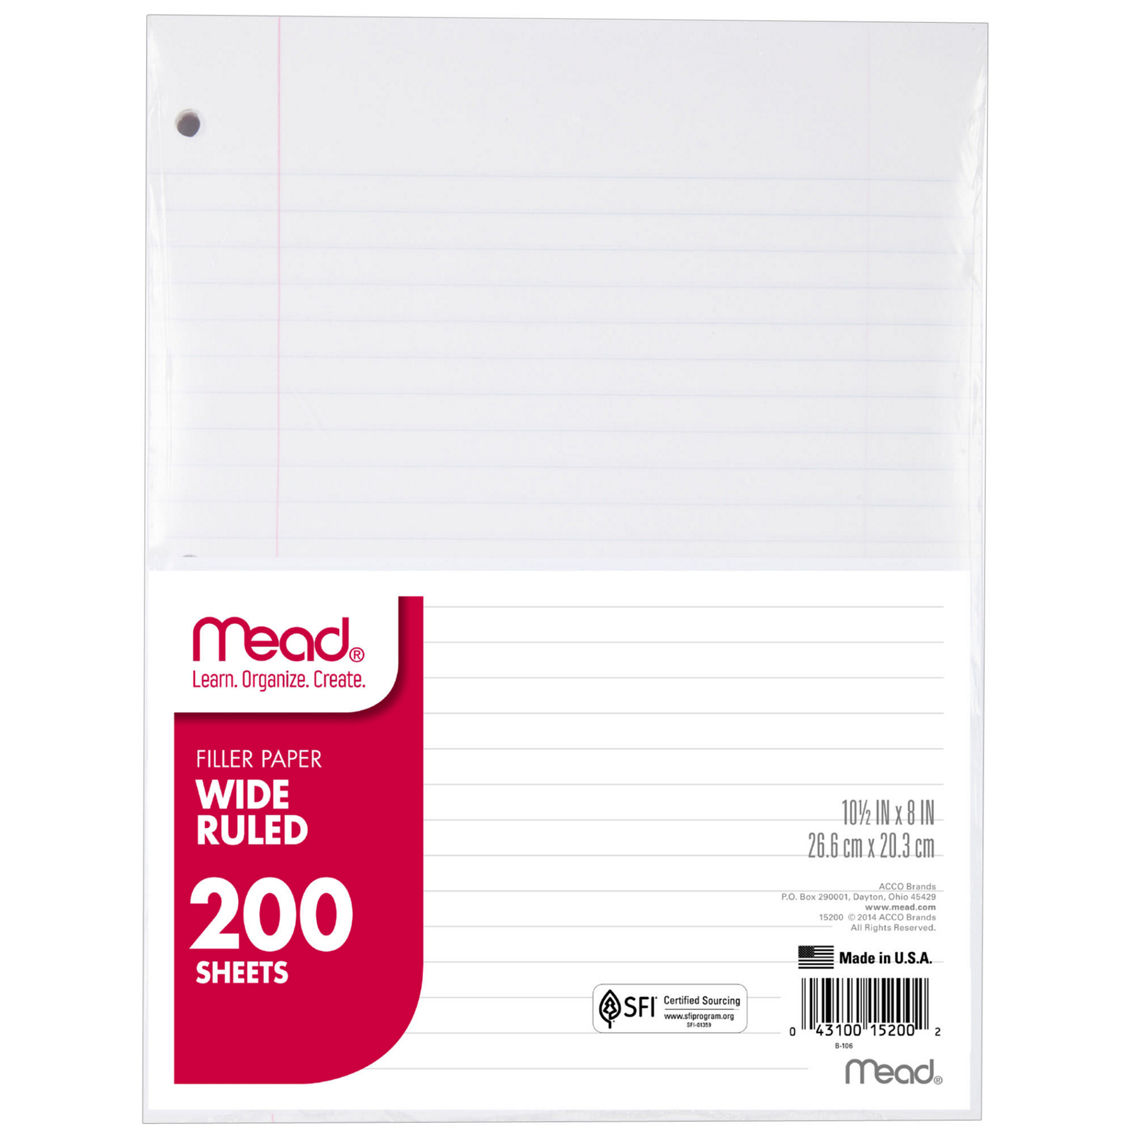 Mead® Notebook Filler Paper, Wide Ruled, 200 Sheets Per Pack, 3 Packs - Image 2 of 5